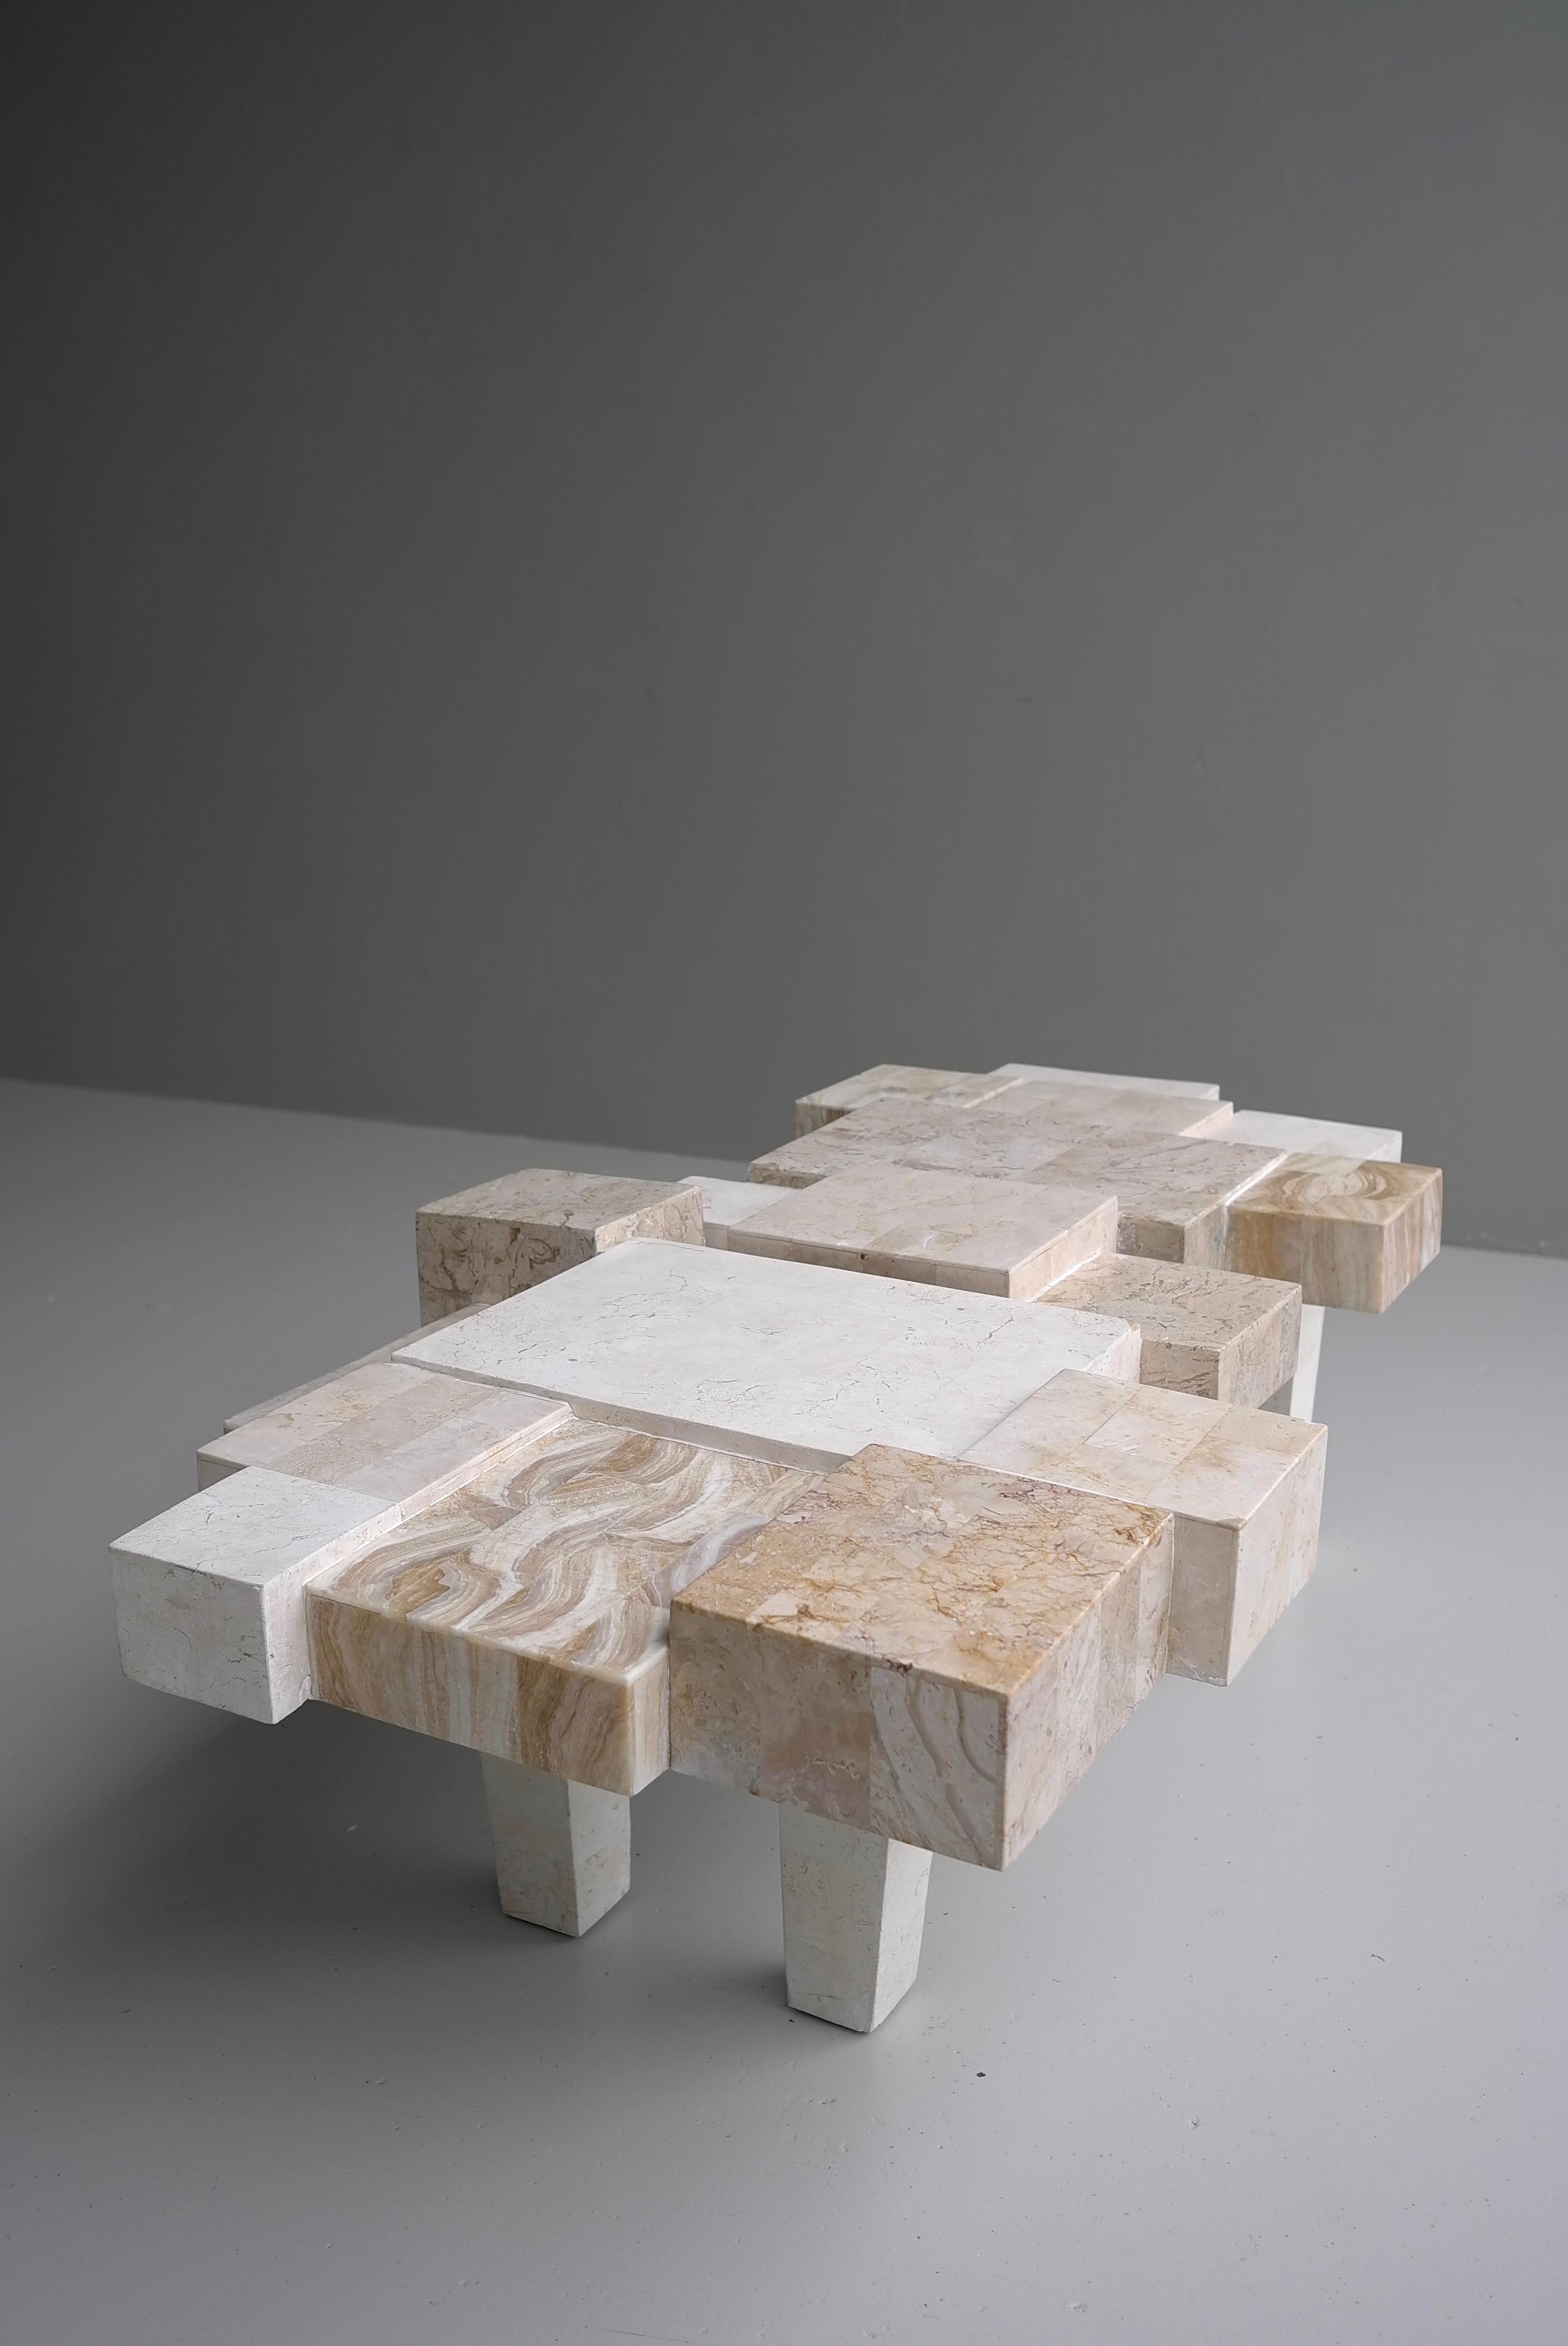 Architectural Travertin and White Stone Art Coffee table, Belgium, 1970's For Sale 2